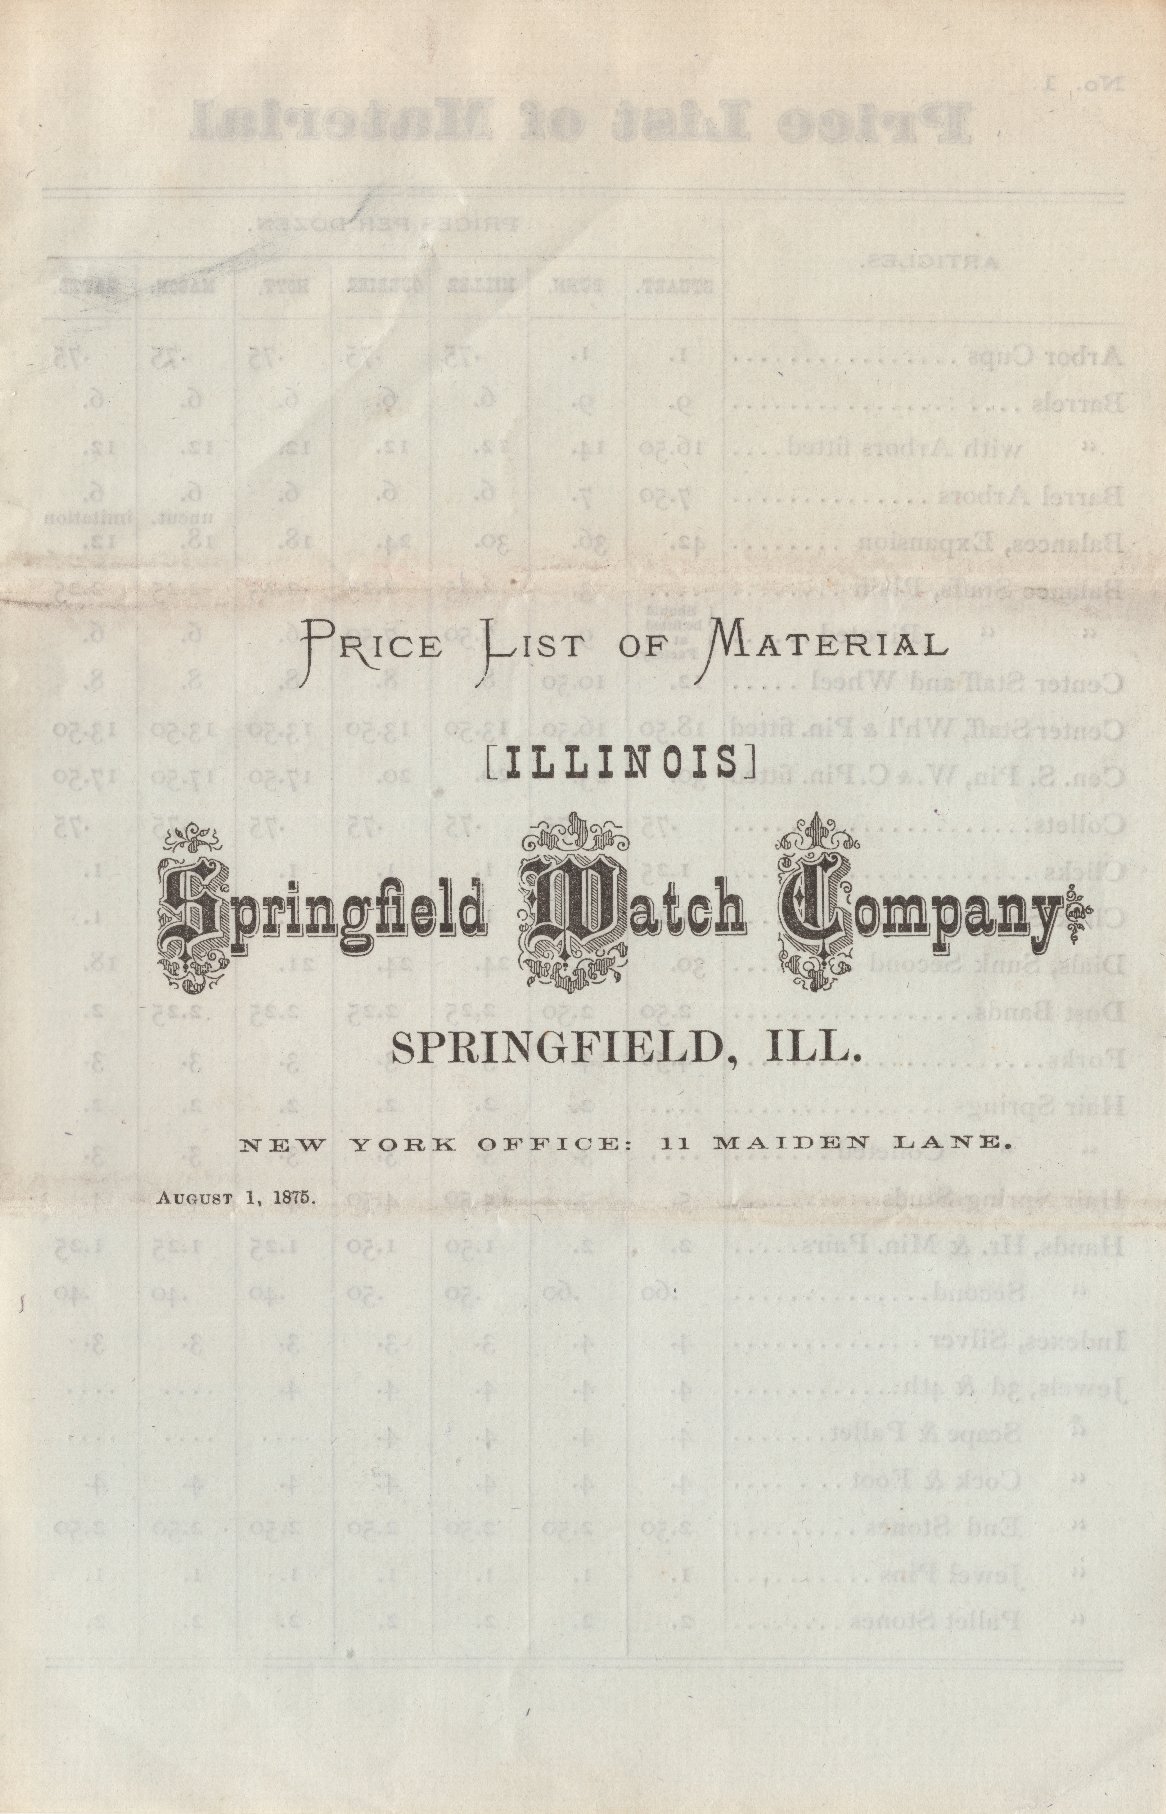 Price List of Material: Illinois Springfield Watch Company Cover Image